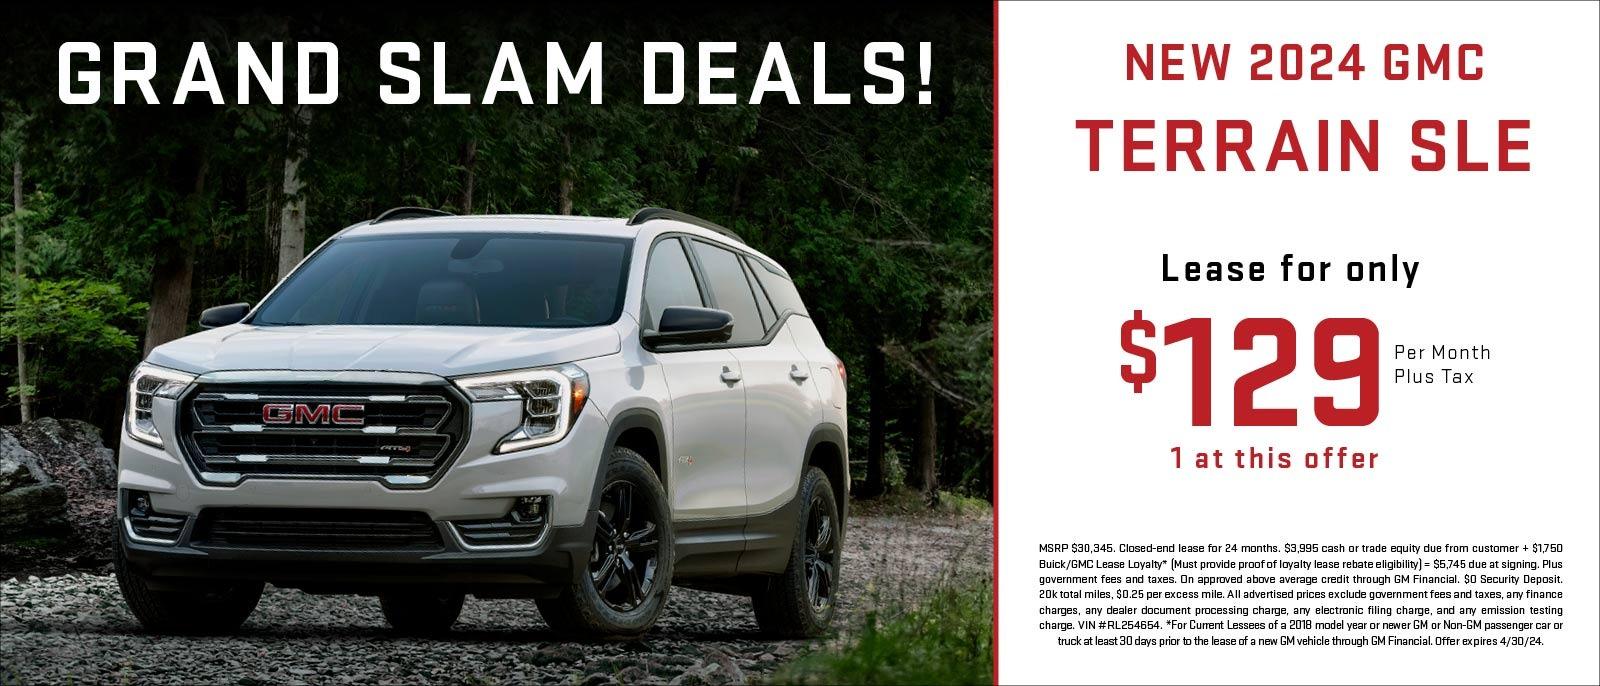 NEW 2024 GMC TERRAIN SLE Lease for only $129 Per Month Plus Tax 1 at this offer